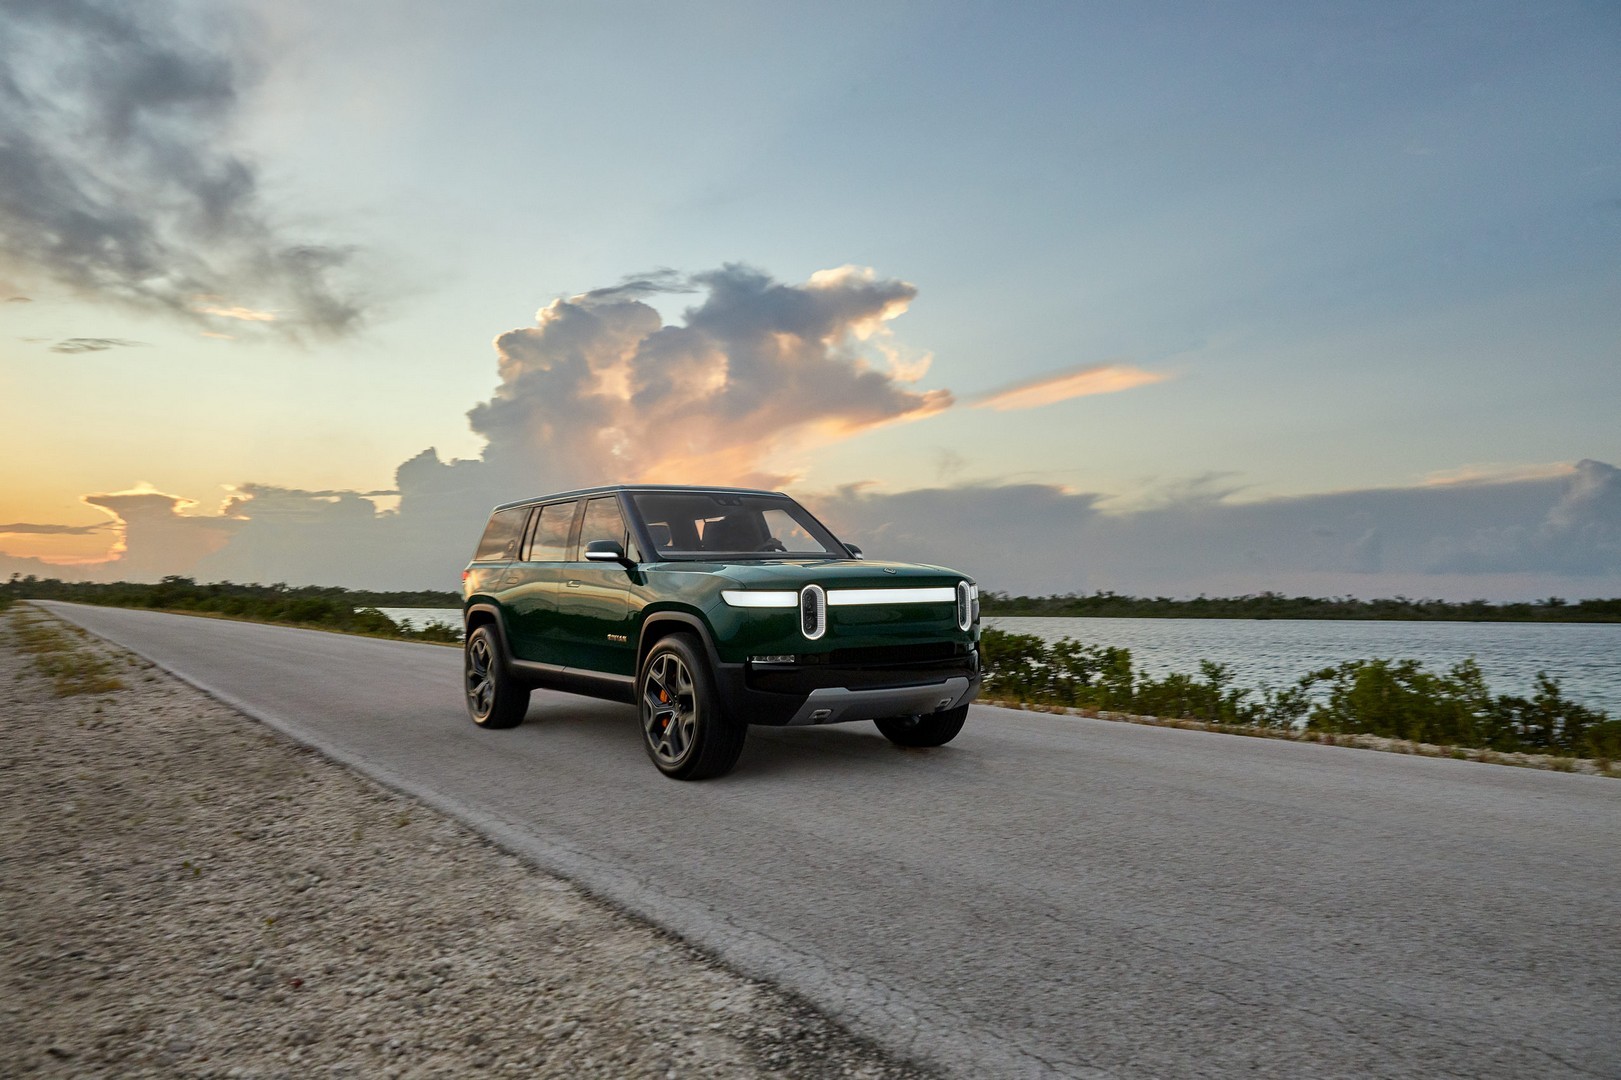 SevenSeat Rivian R1S Launch Edition Costs Just 2,500